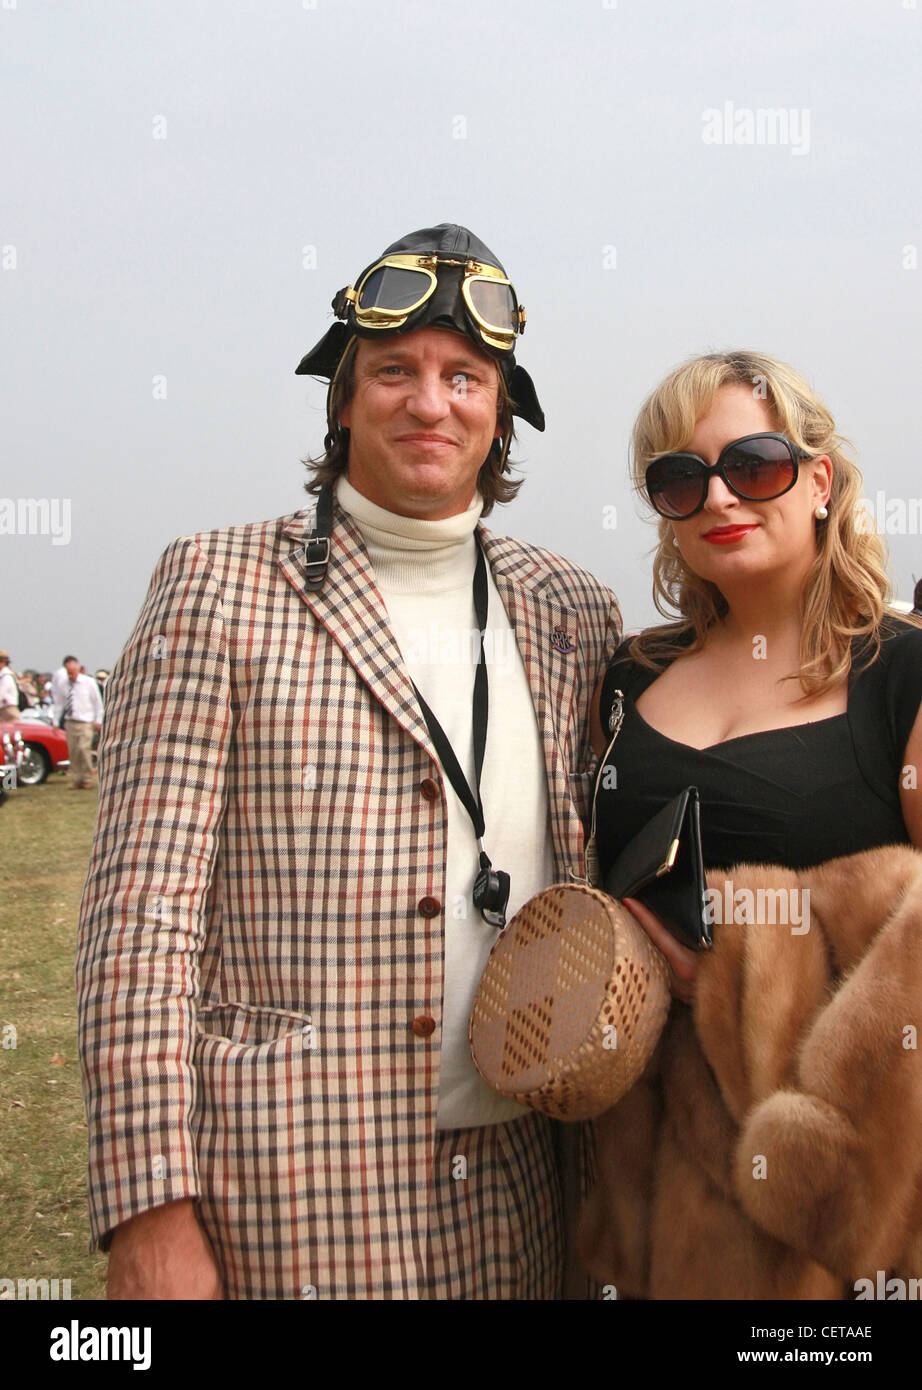 Paar in Retro-Outfit beim Goodwood Revival. Stockfoto